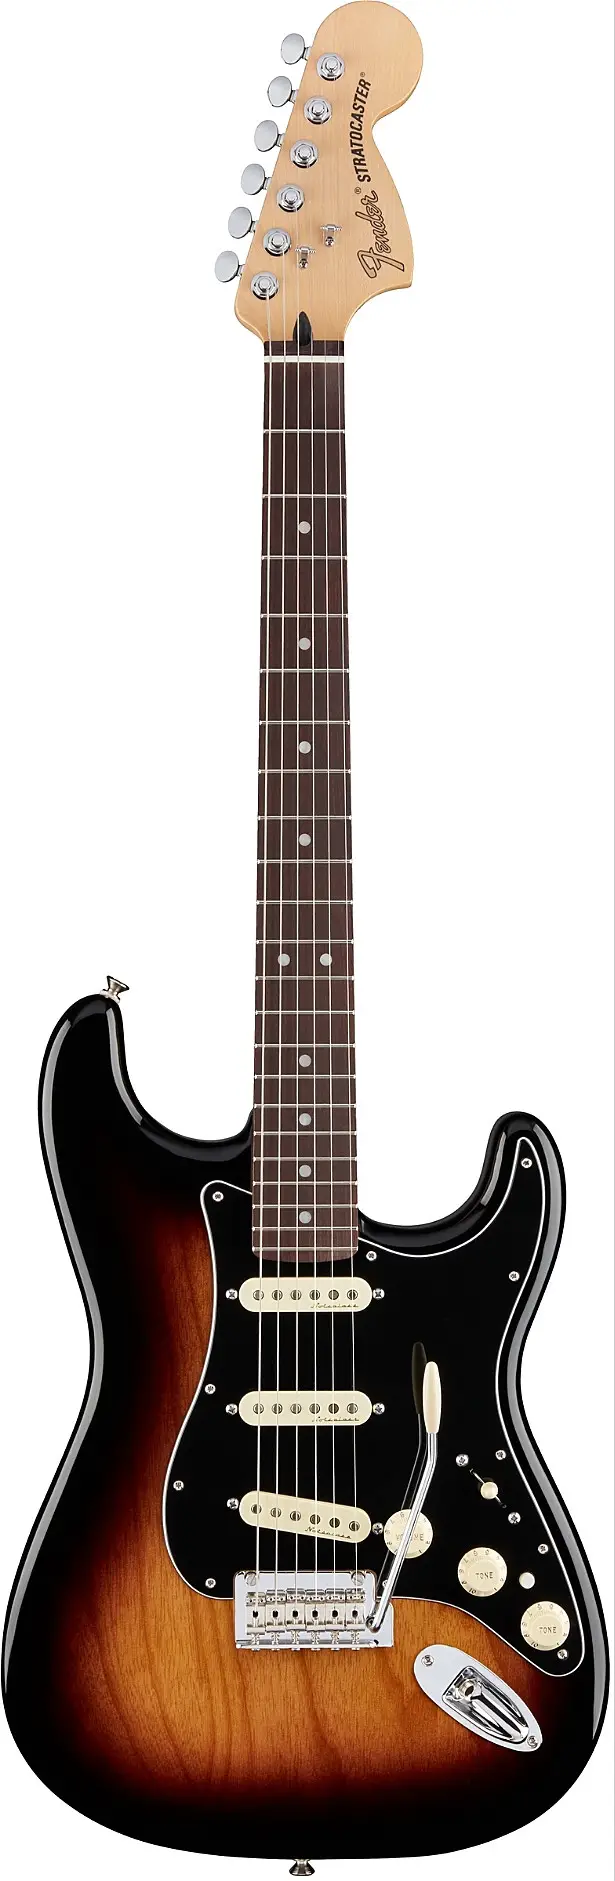 2017 Deluxe Stratocaster by Fender